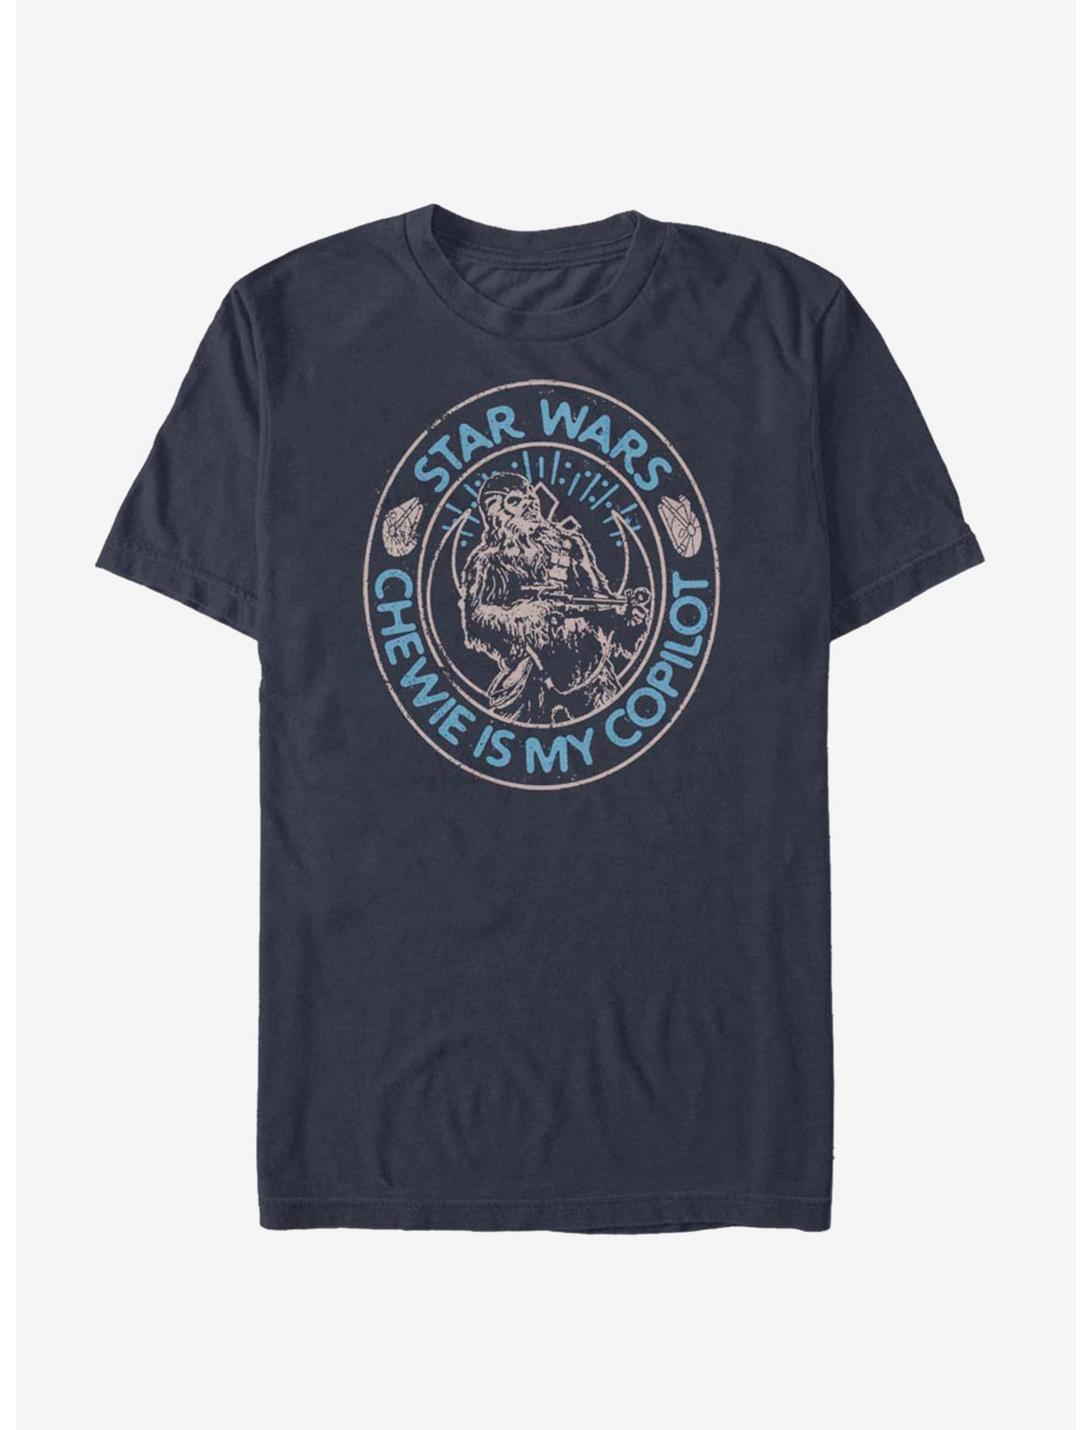 Star Wars Episode IX The Rise Of Skywalker Way Of The Wookiee T-Shirt, NAVY, hi-res